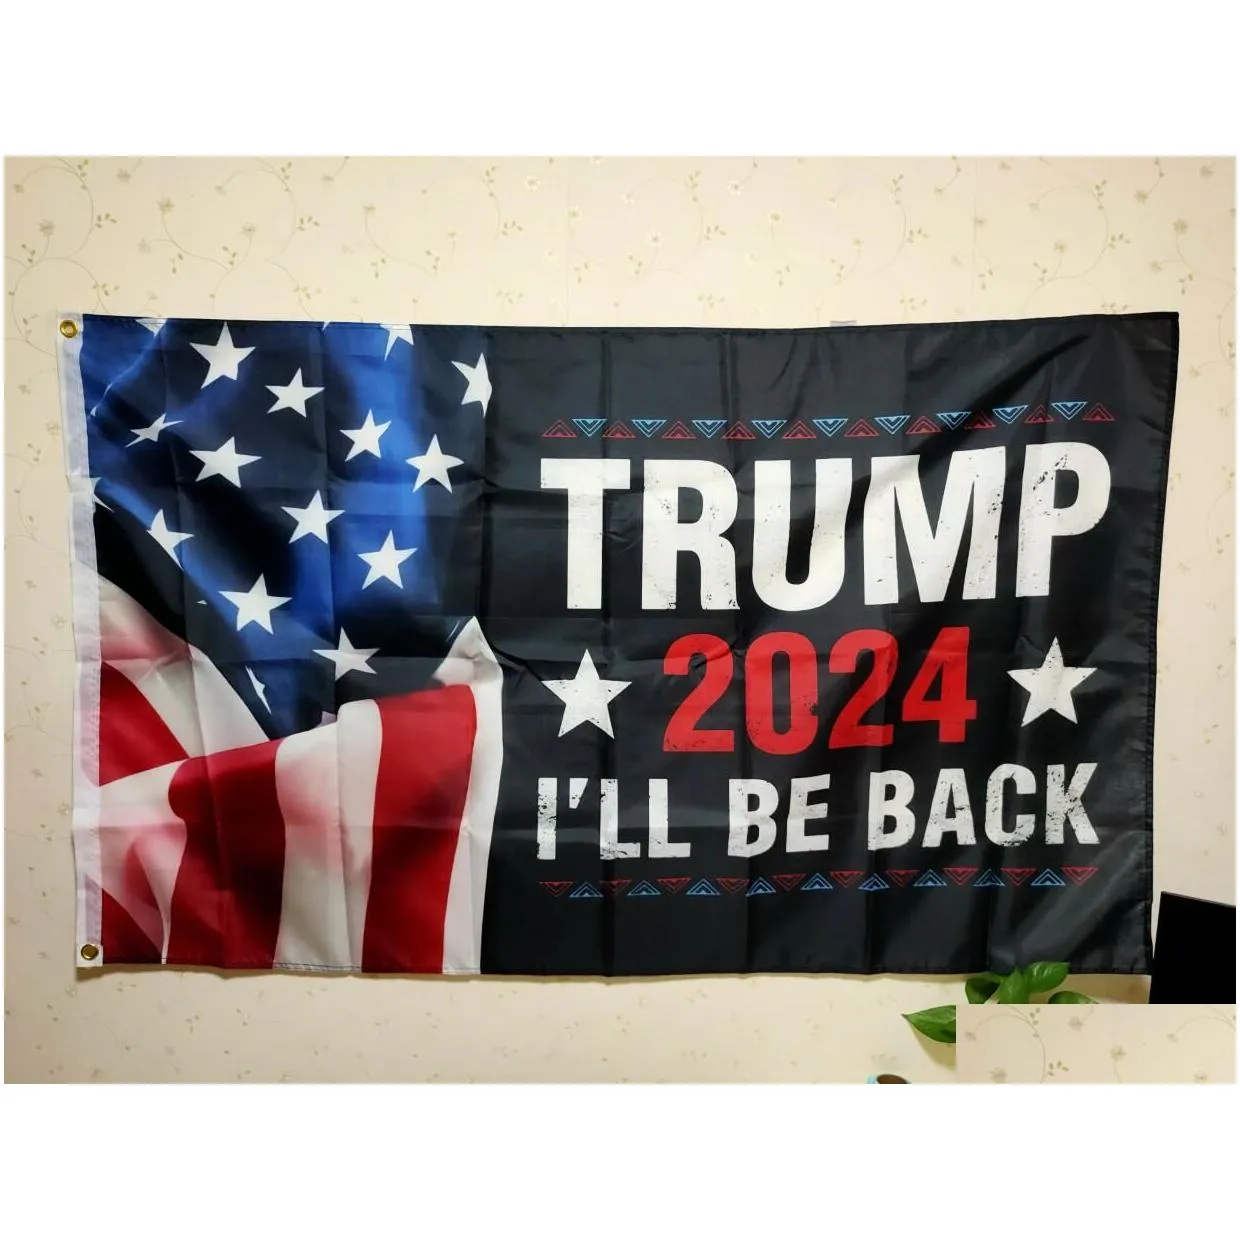 donald trump 2024 flag keep america again lgbt president usa the rules have changed take america back 3x5 ft 90x150 cm